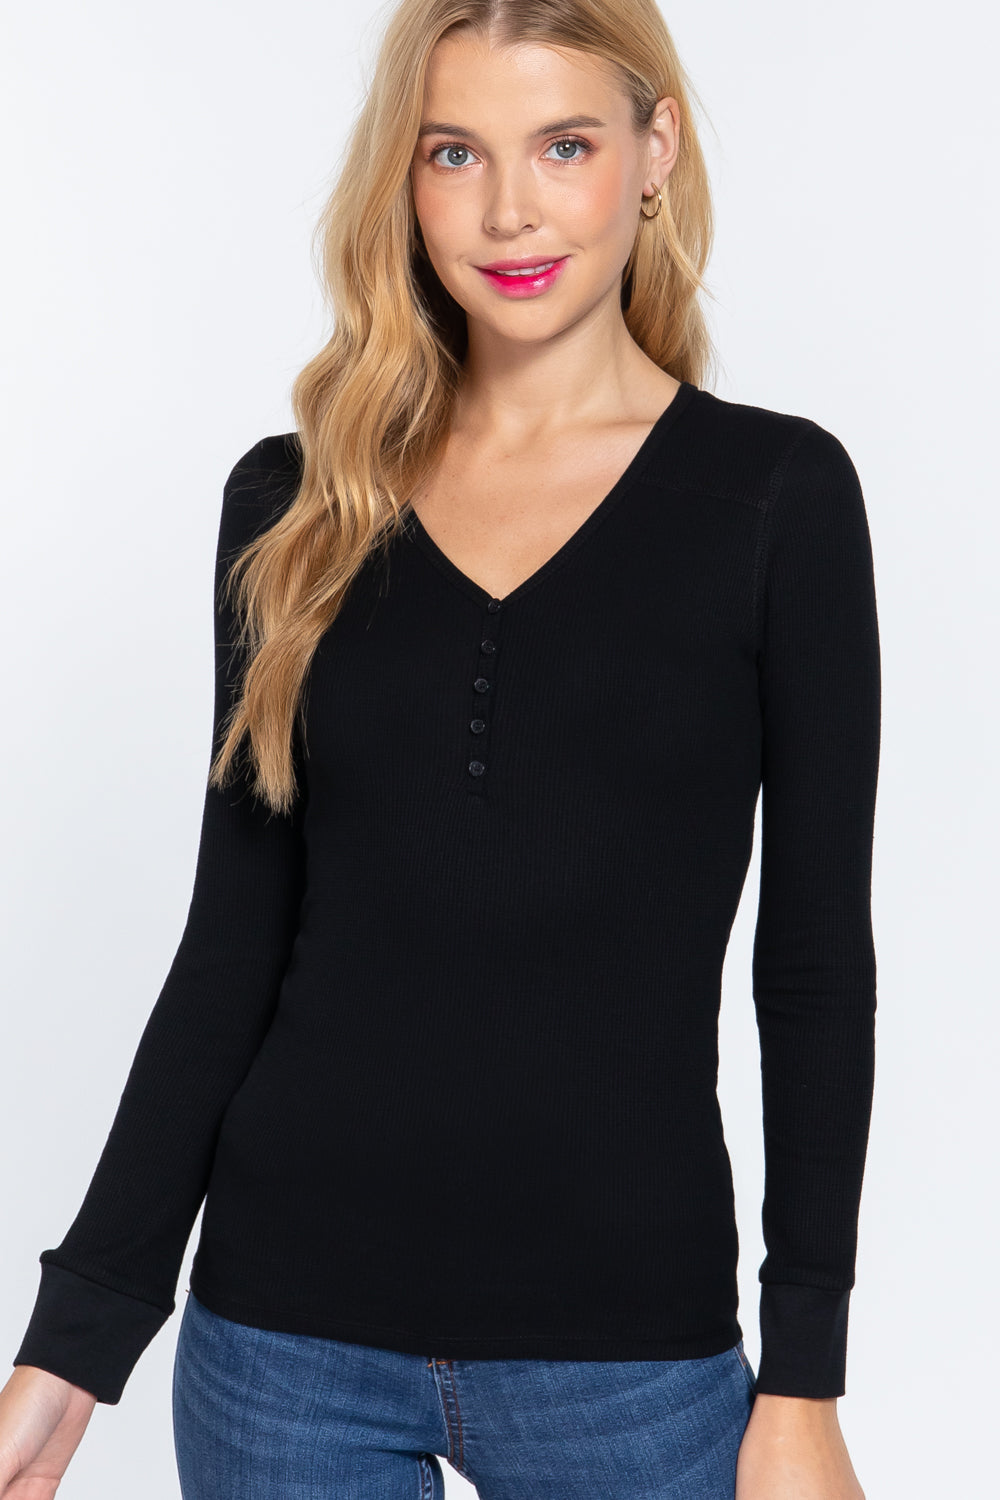 Long Sleeve V-neck Placket Women's Thermal Top